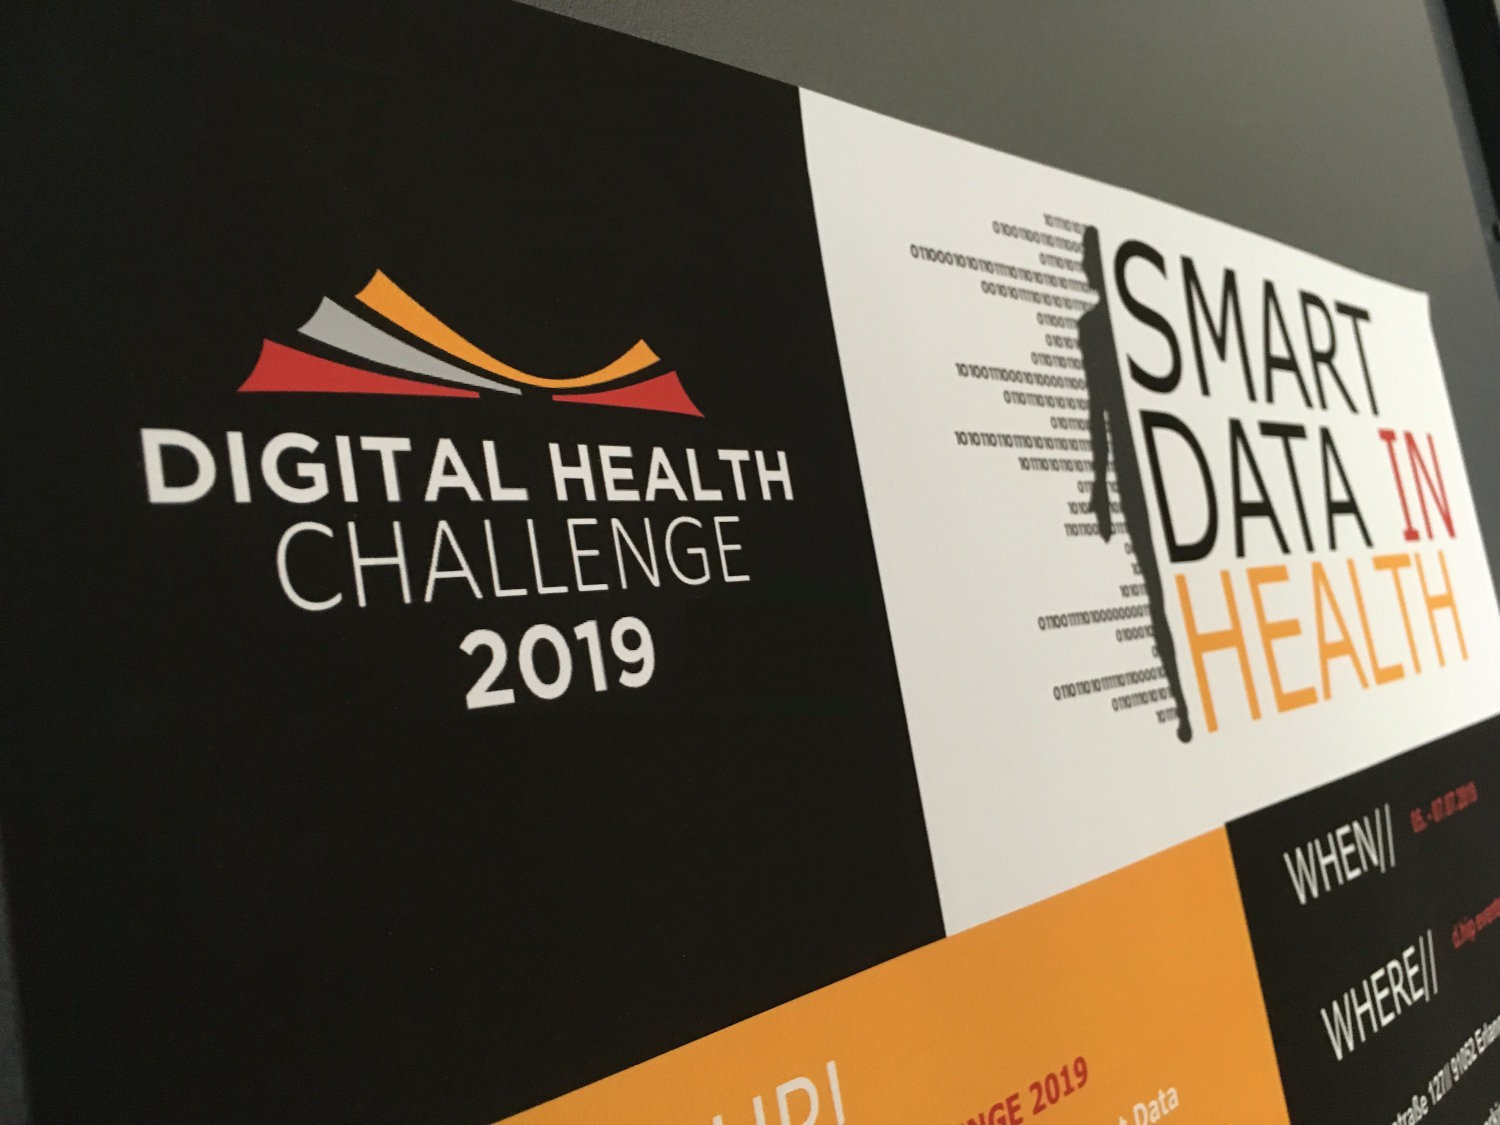 a poster with the logo of the digital health challenge on black background as the left part, in the background, on white, there is a symbol of person with lines of numbers, dissected in two, the other half being replaced by the title "Smart Data In Health".